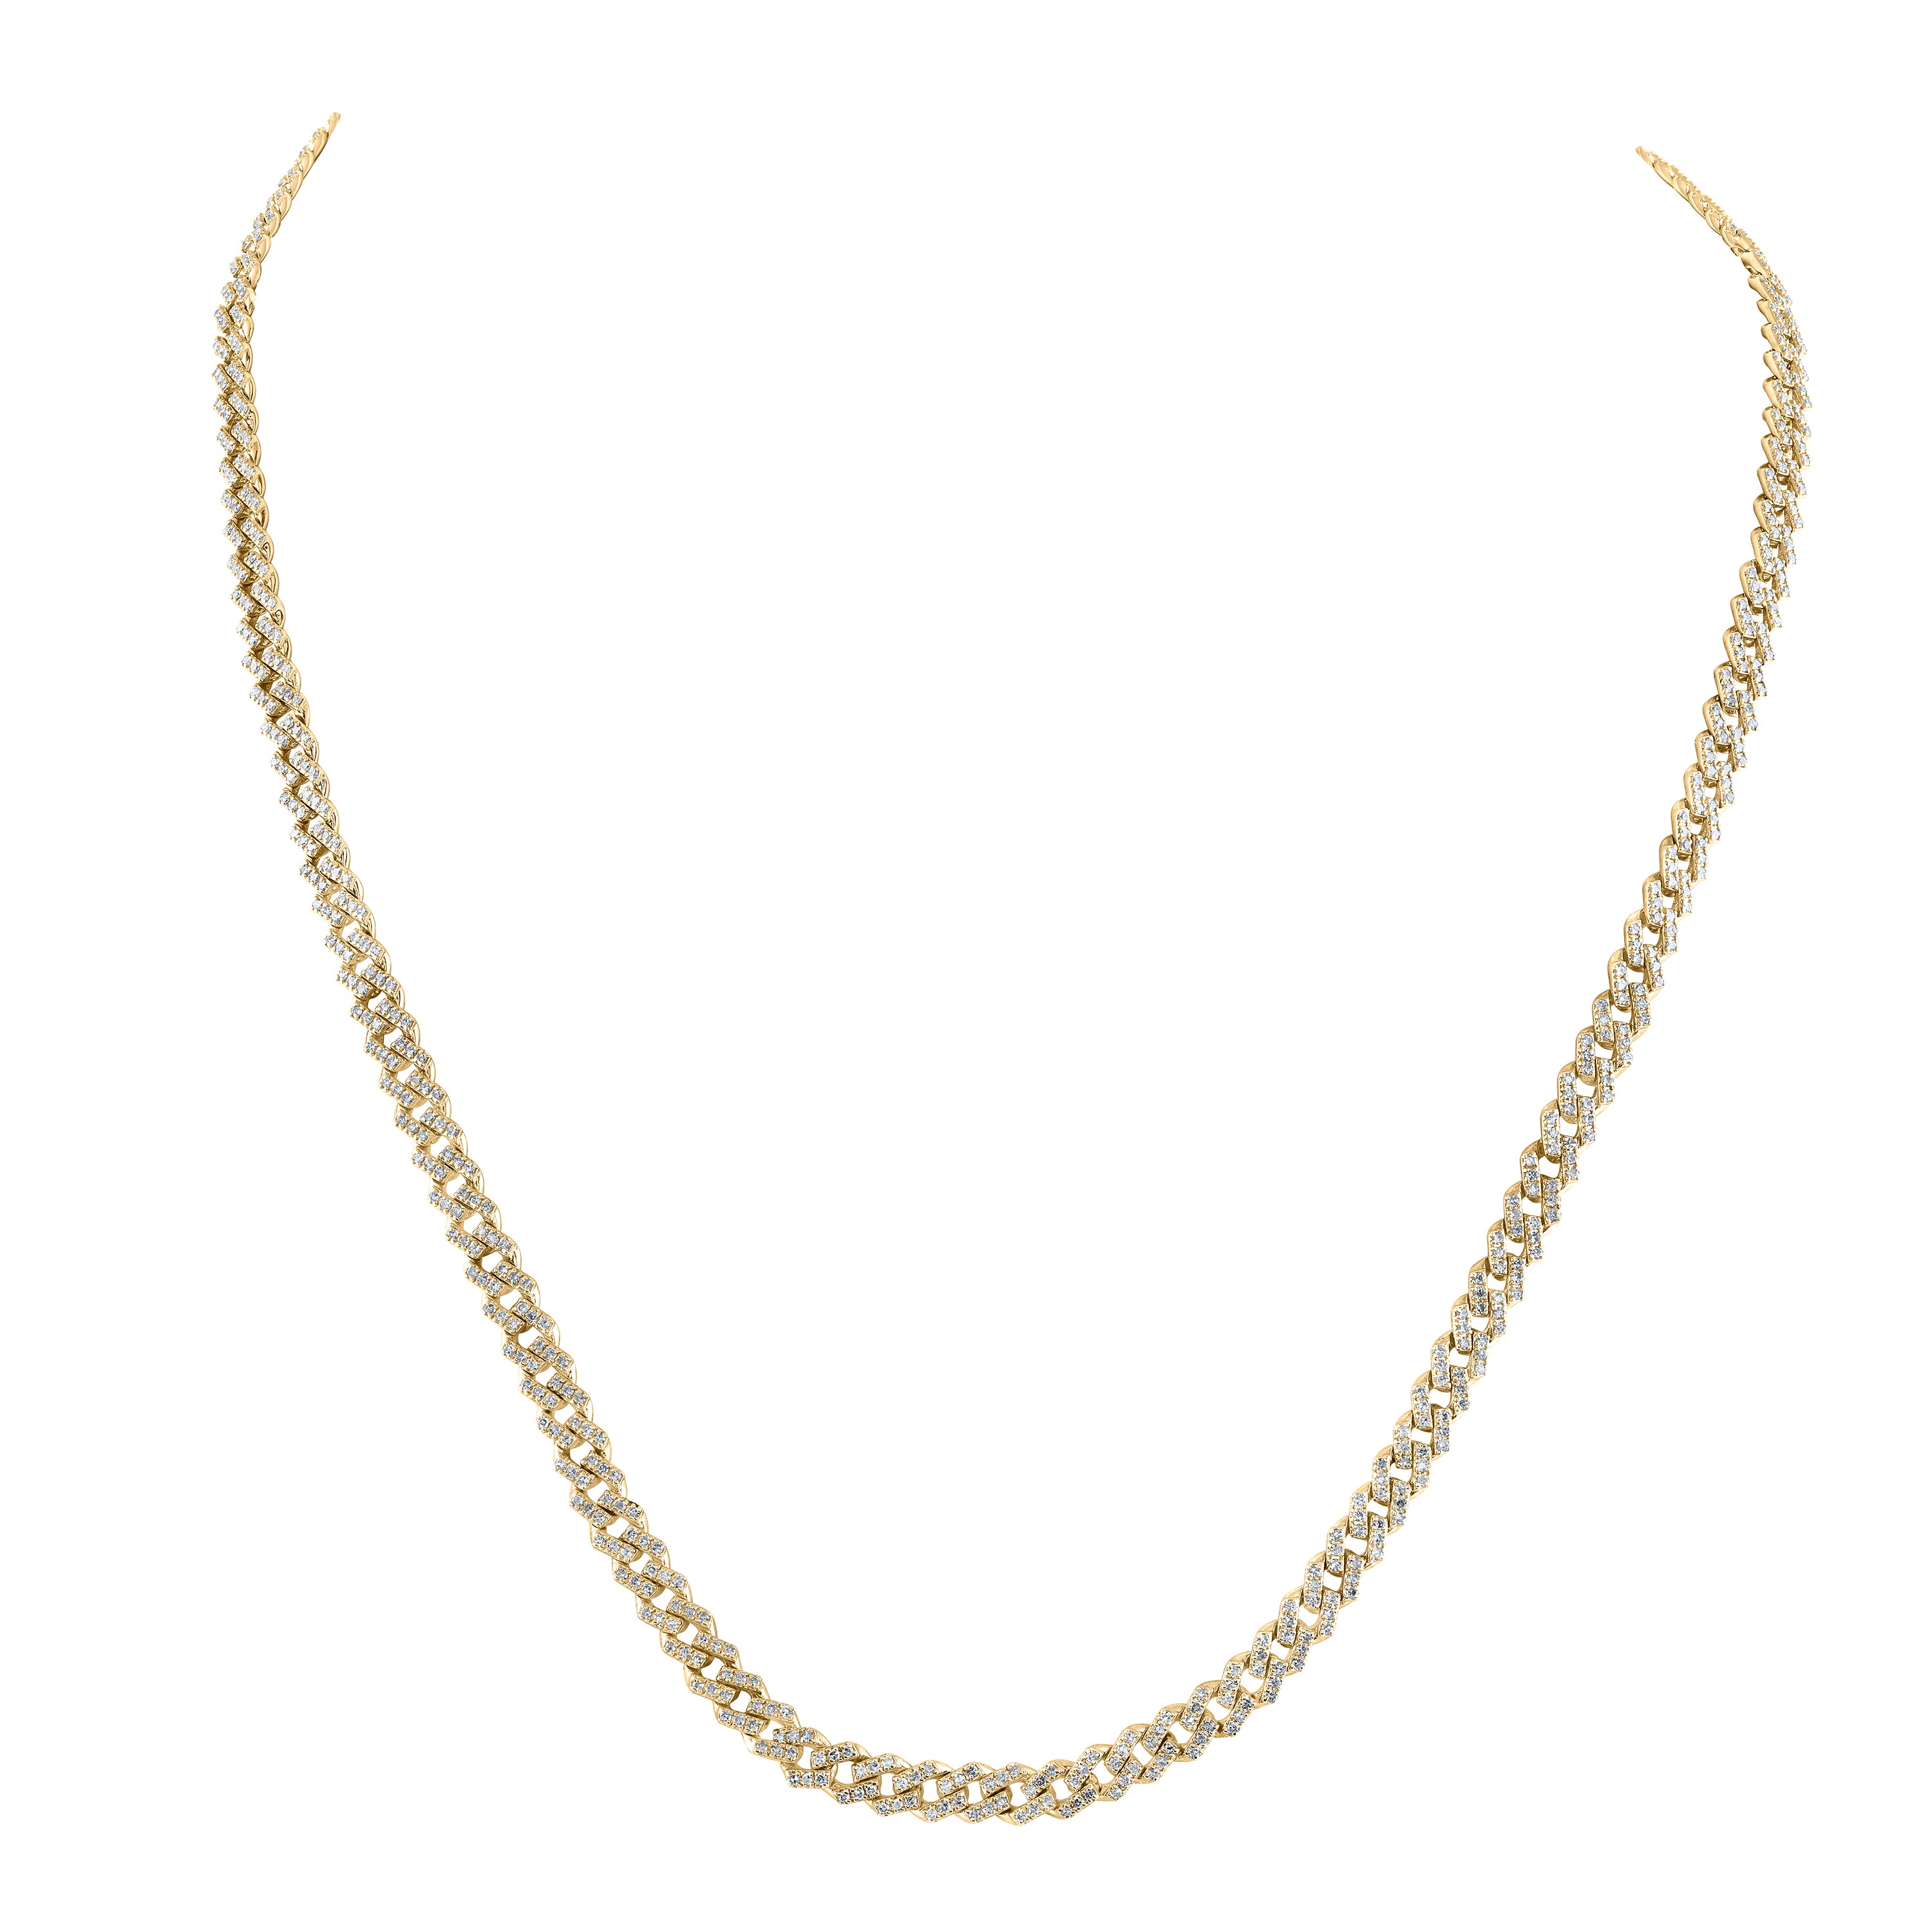 10Kt Yellow Gold 3 1/2Ctw-Dia Nk (5Mm) Mens Chain (18 Inch)